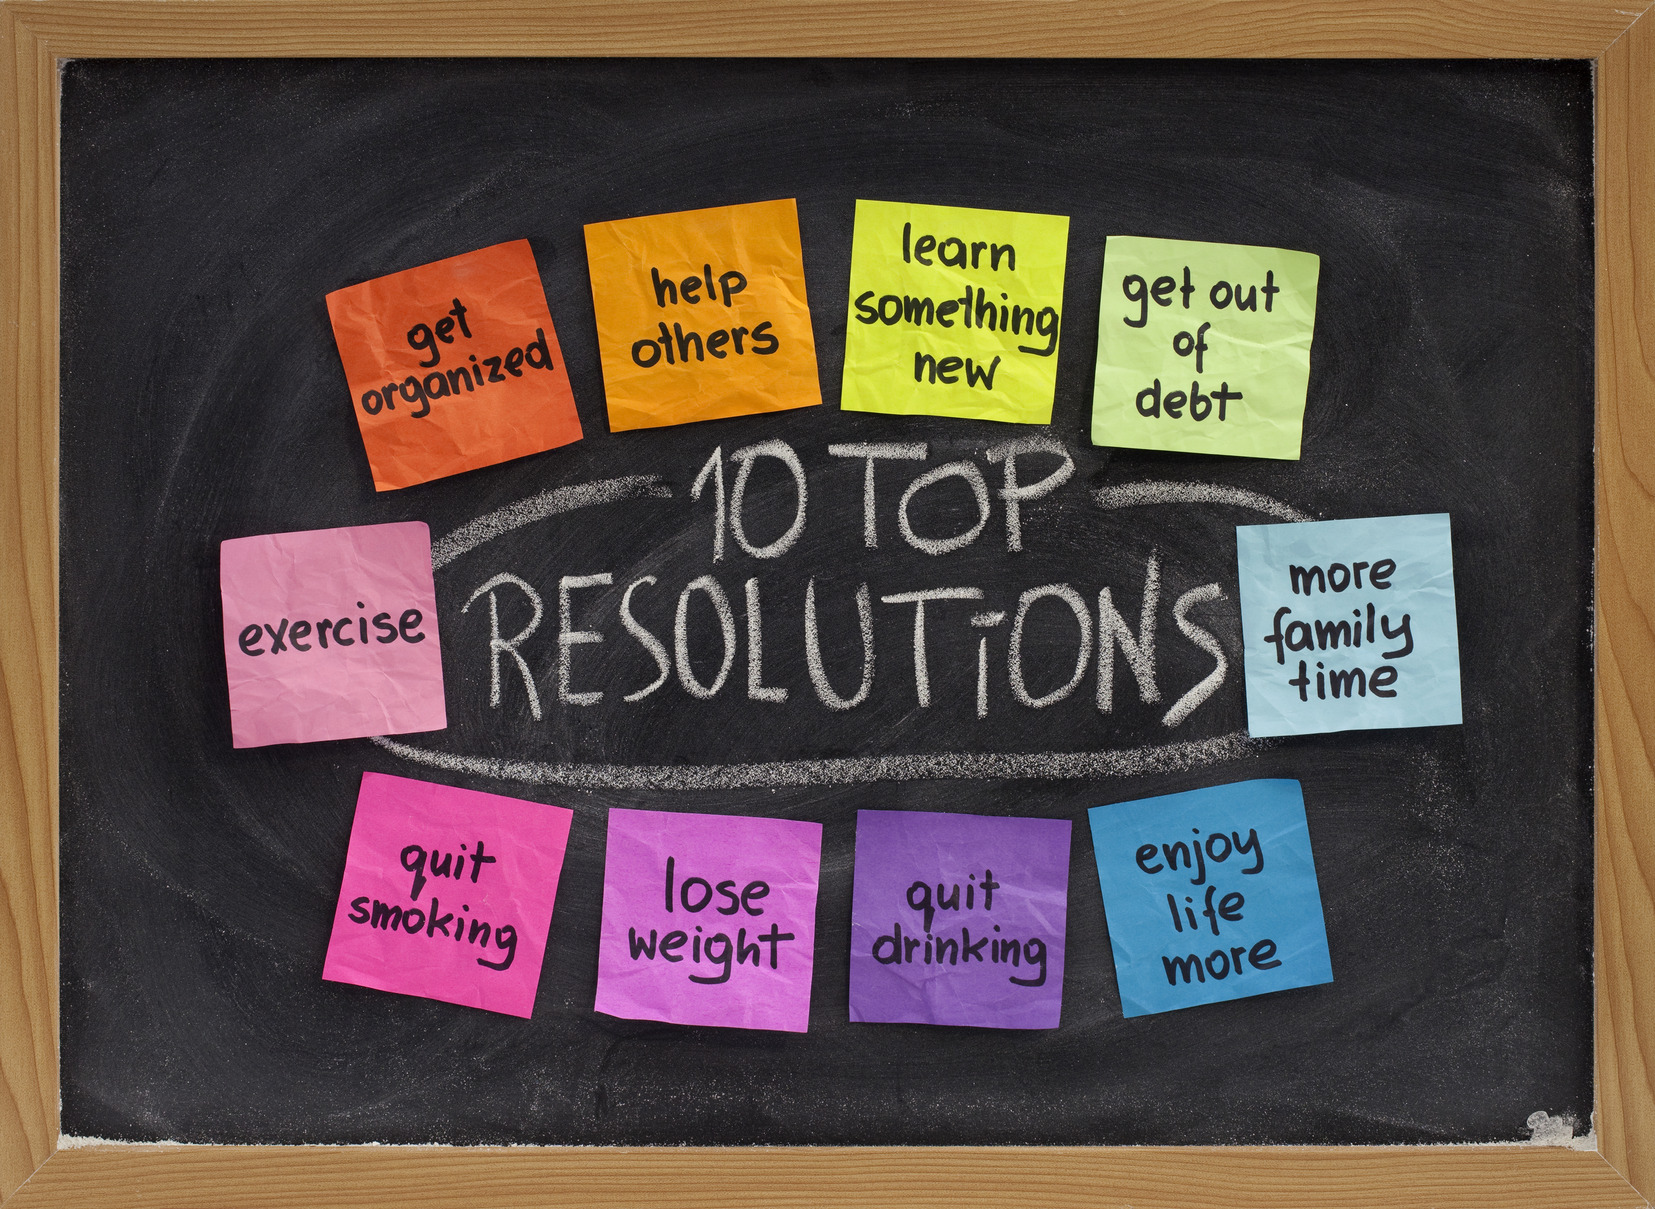 Our Story Begins: Forget the Resolutions!